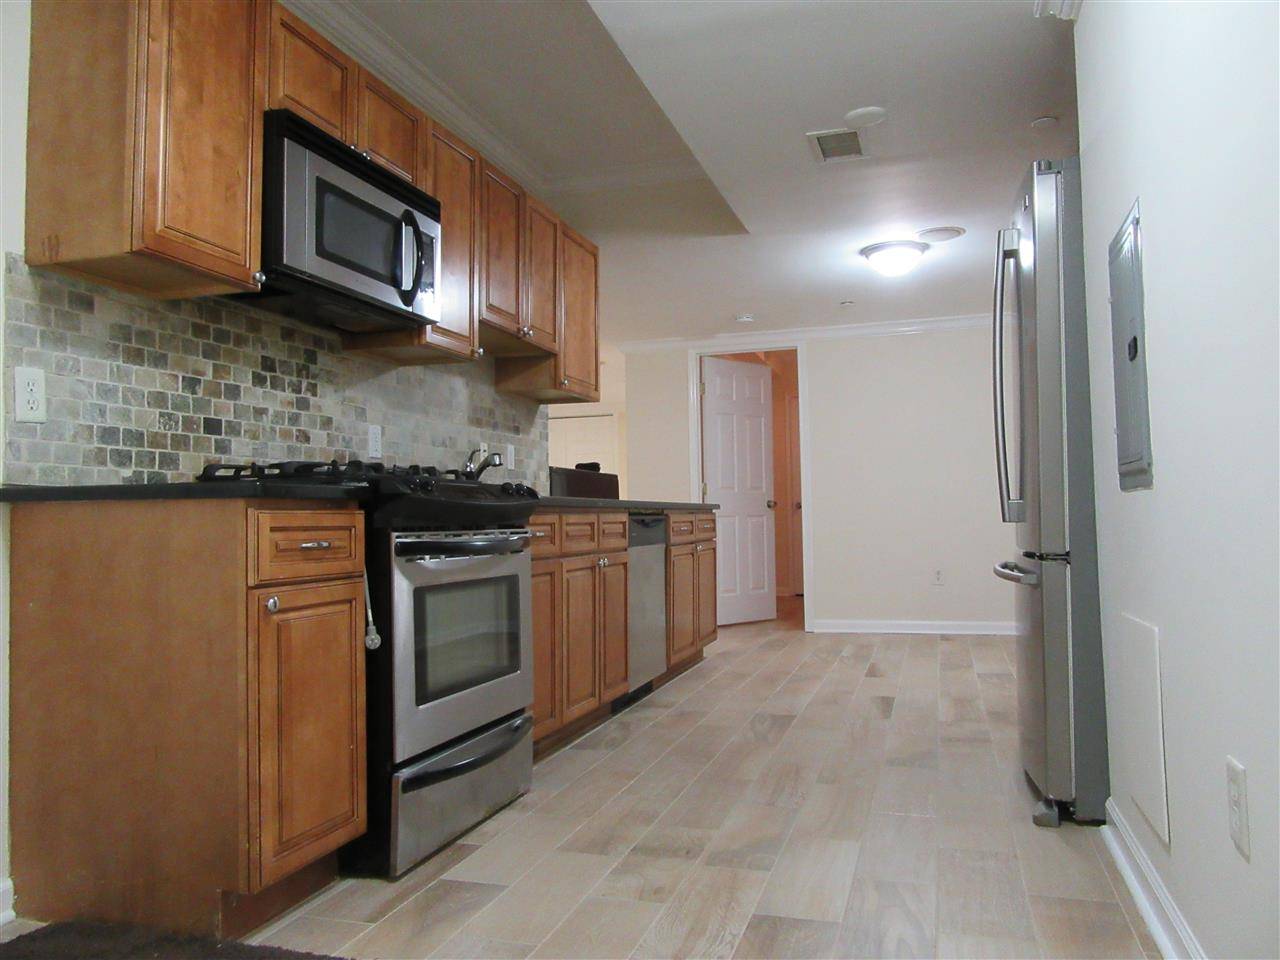 Check out this spacious - 3 BR Condo New Jersey